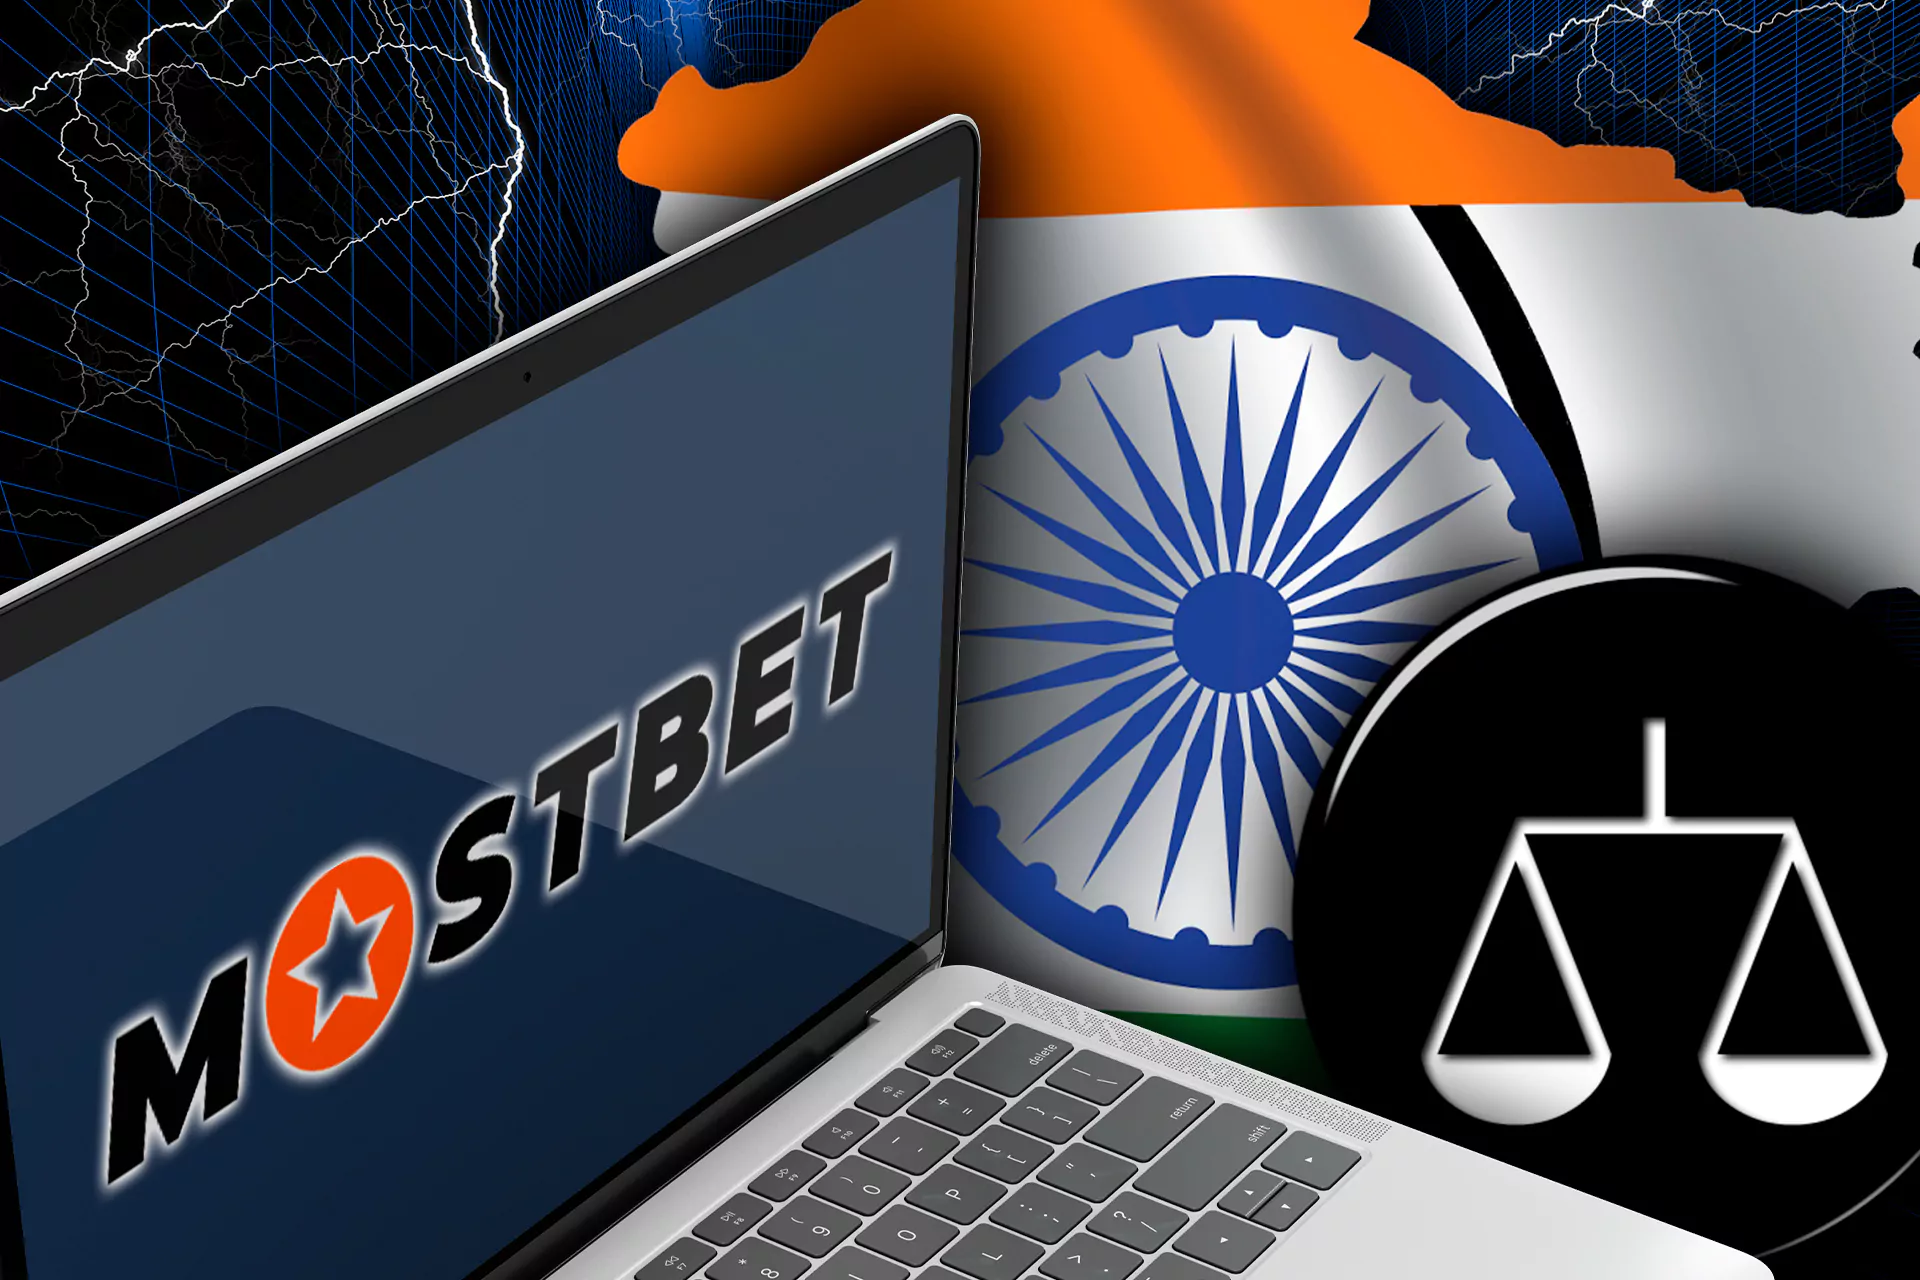 Mostbet is legal and official bookmaker in India.